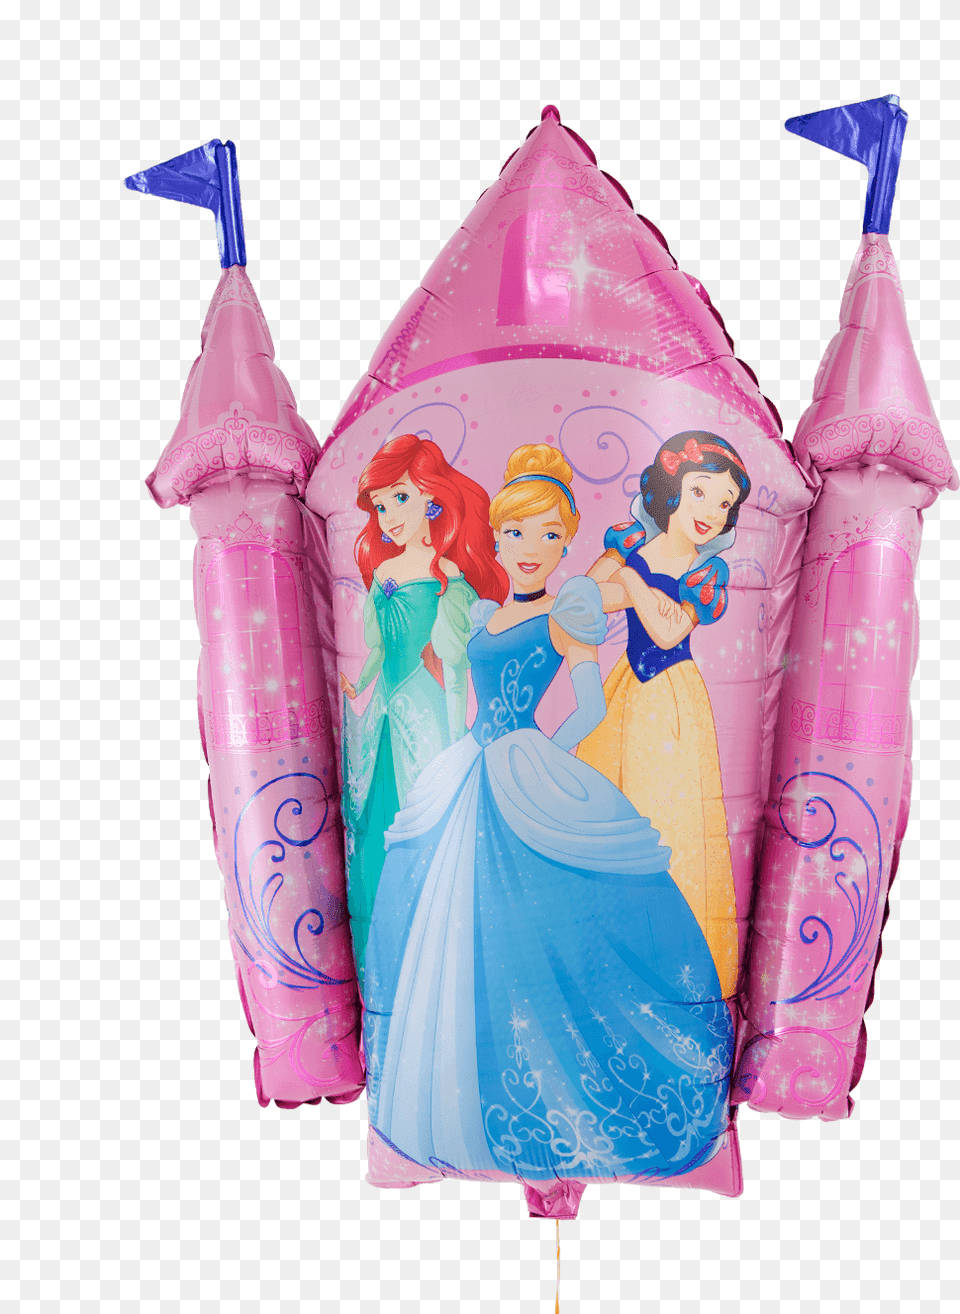 Disney Princess Castle Supershape Balloon Inflatable, Clothing, Coat, Adult, Wedding Free Png Download